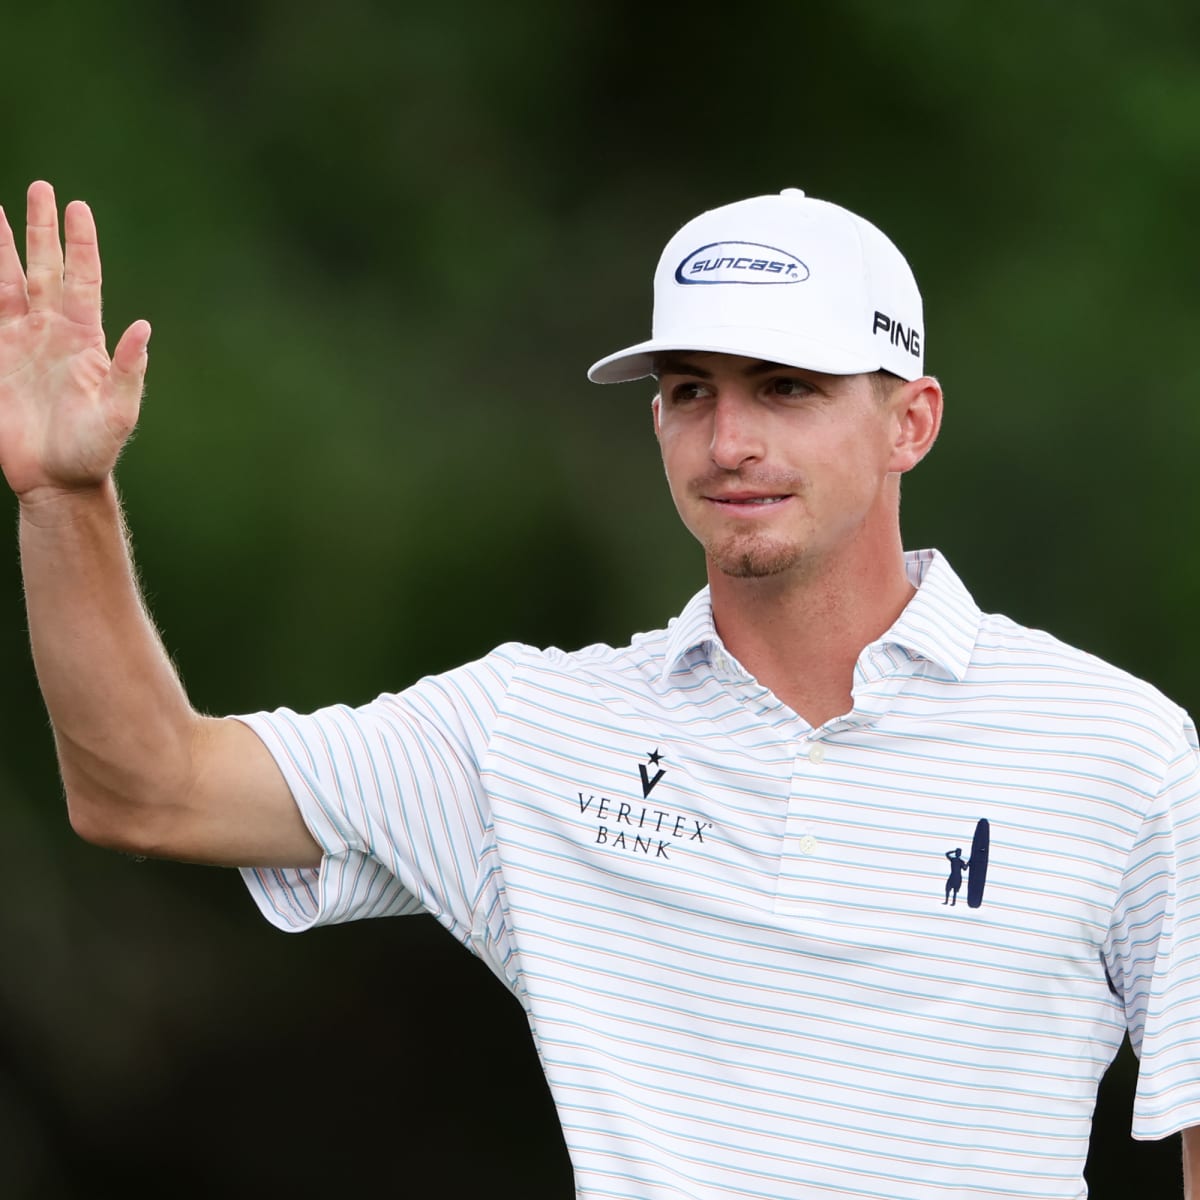 If you didn't see, Sam Bennett just won the 122nd U.S. Amateur